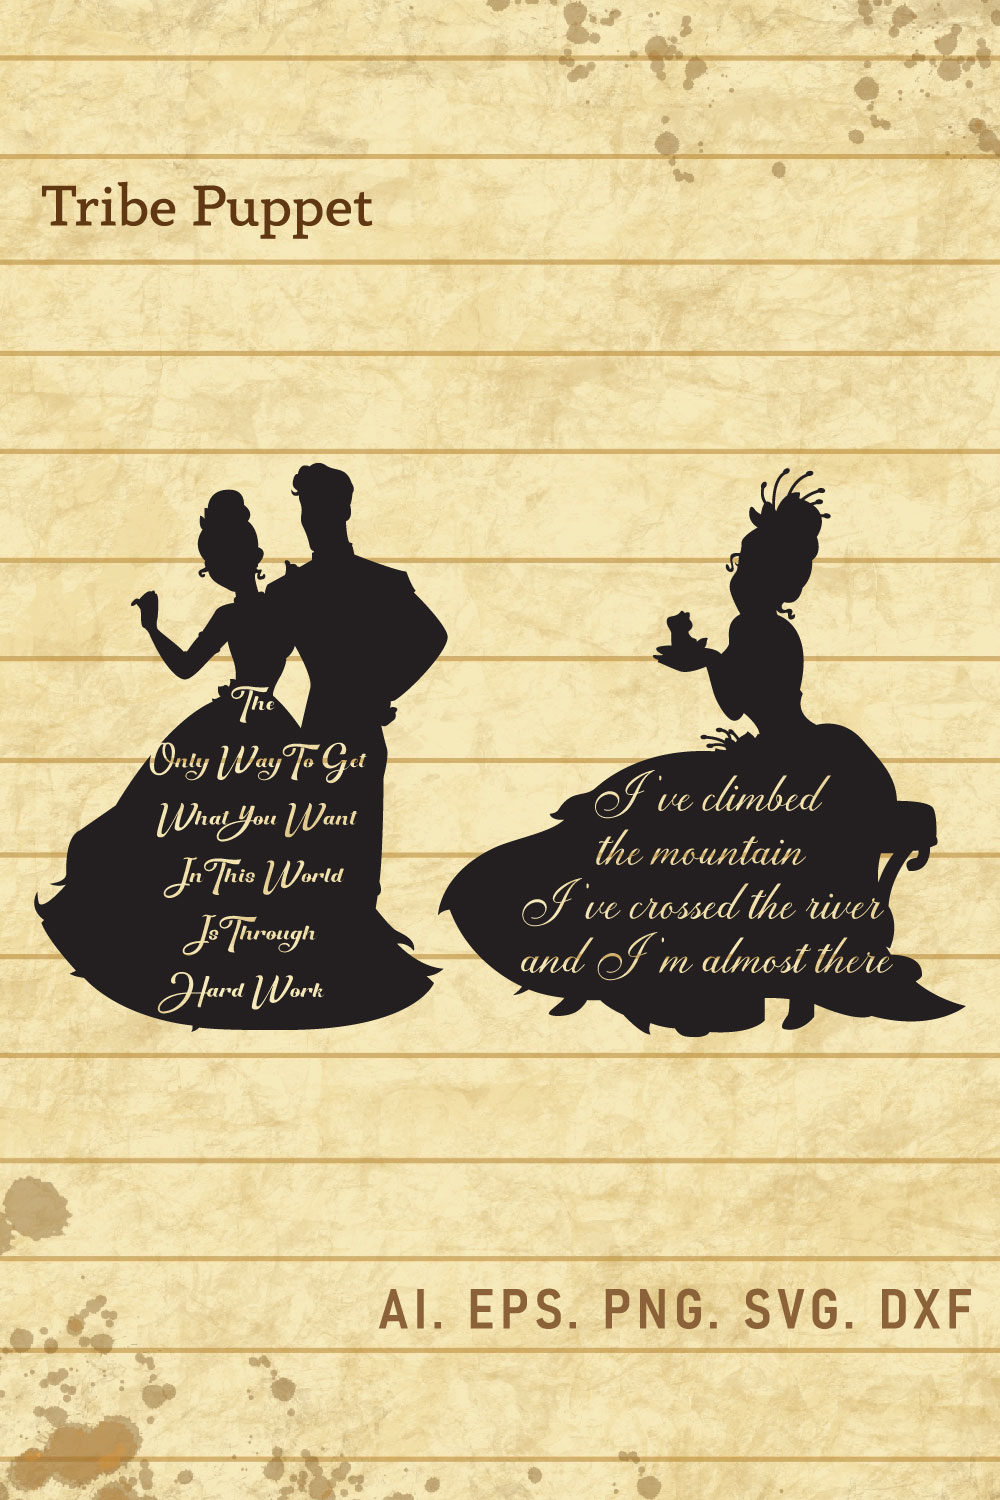 Disney Princess and The Frog Quotes Vector sets pinterest preview image.